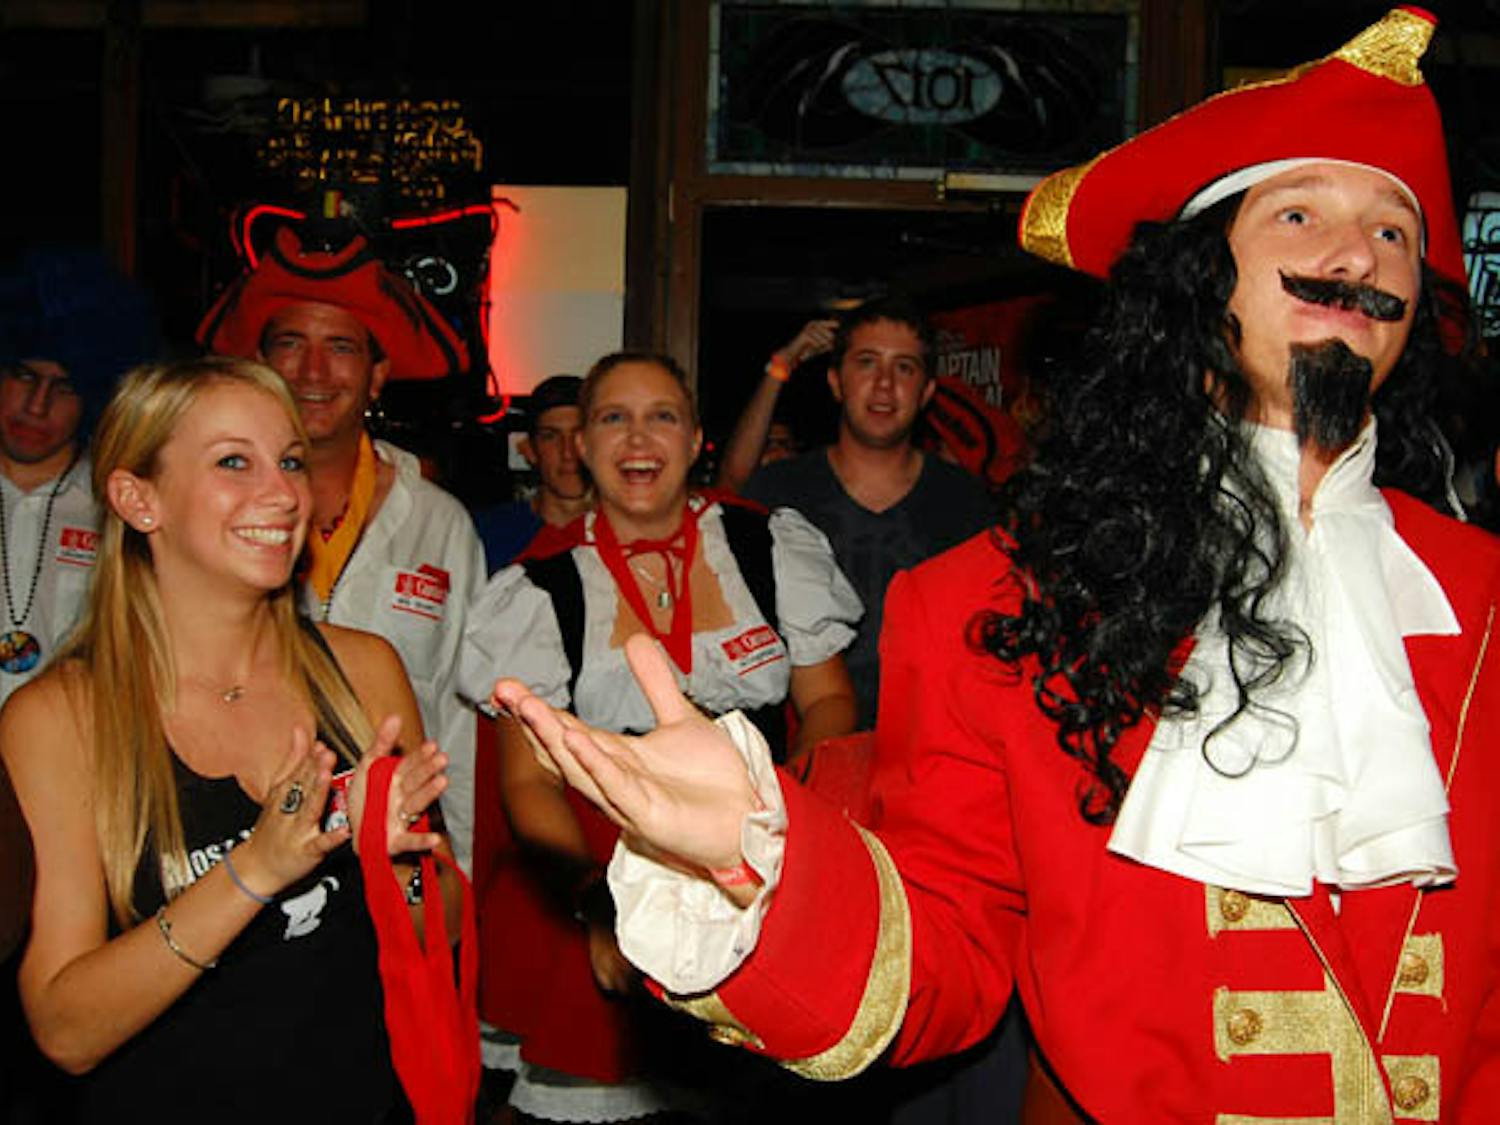 “The Captain” selects a winner for a Halloween costume contest at Mothers Pub and Grill on 1017 W. University Ave.